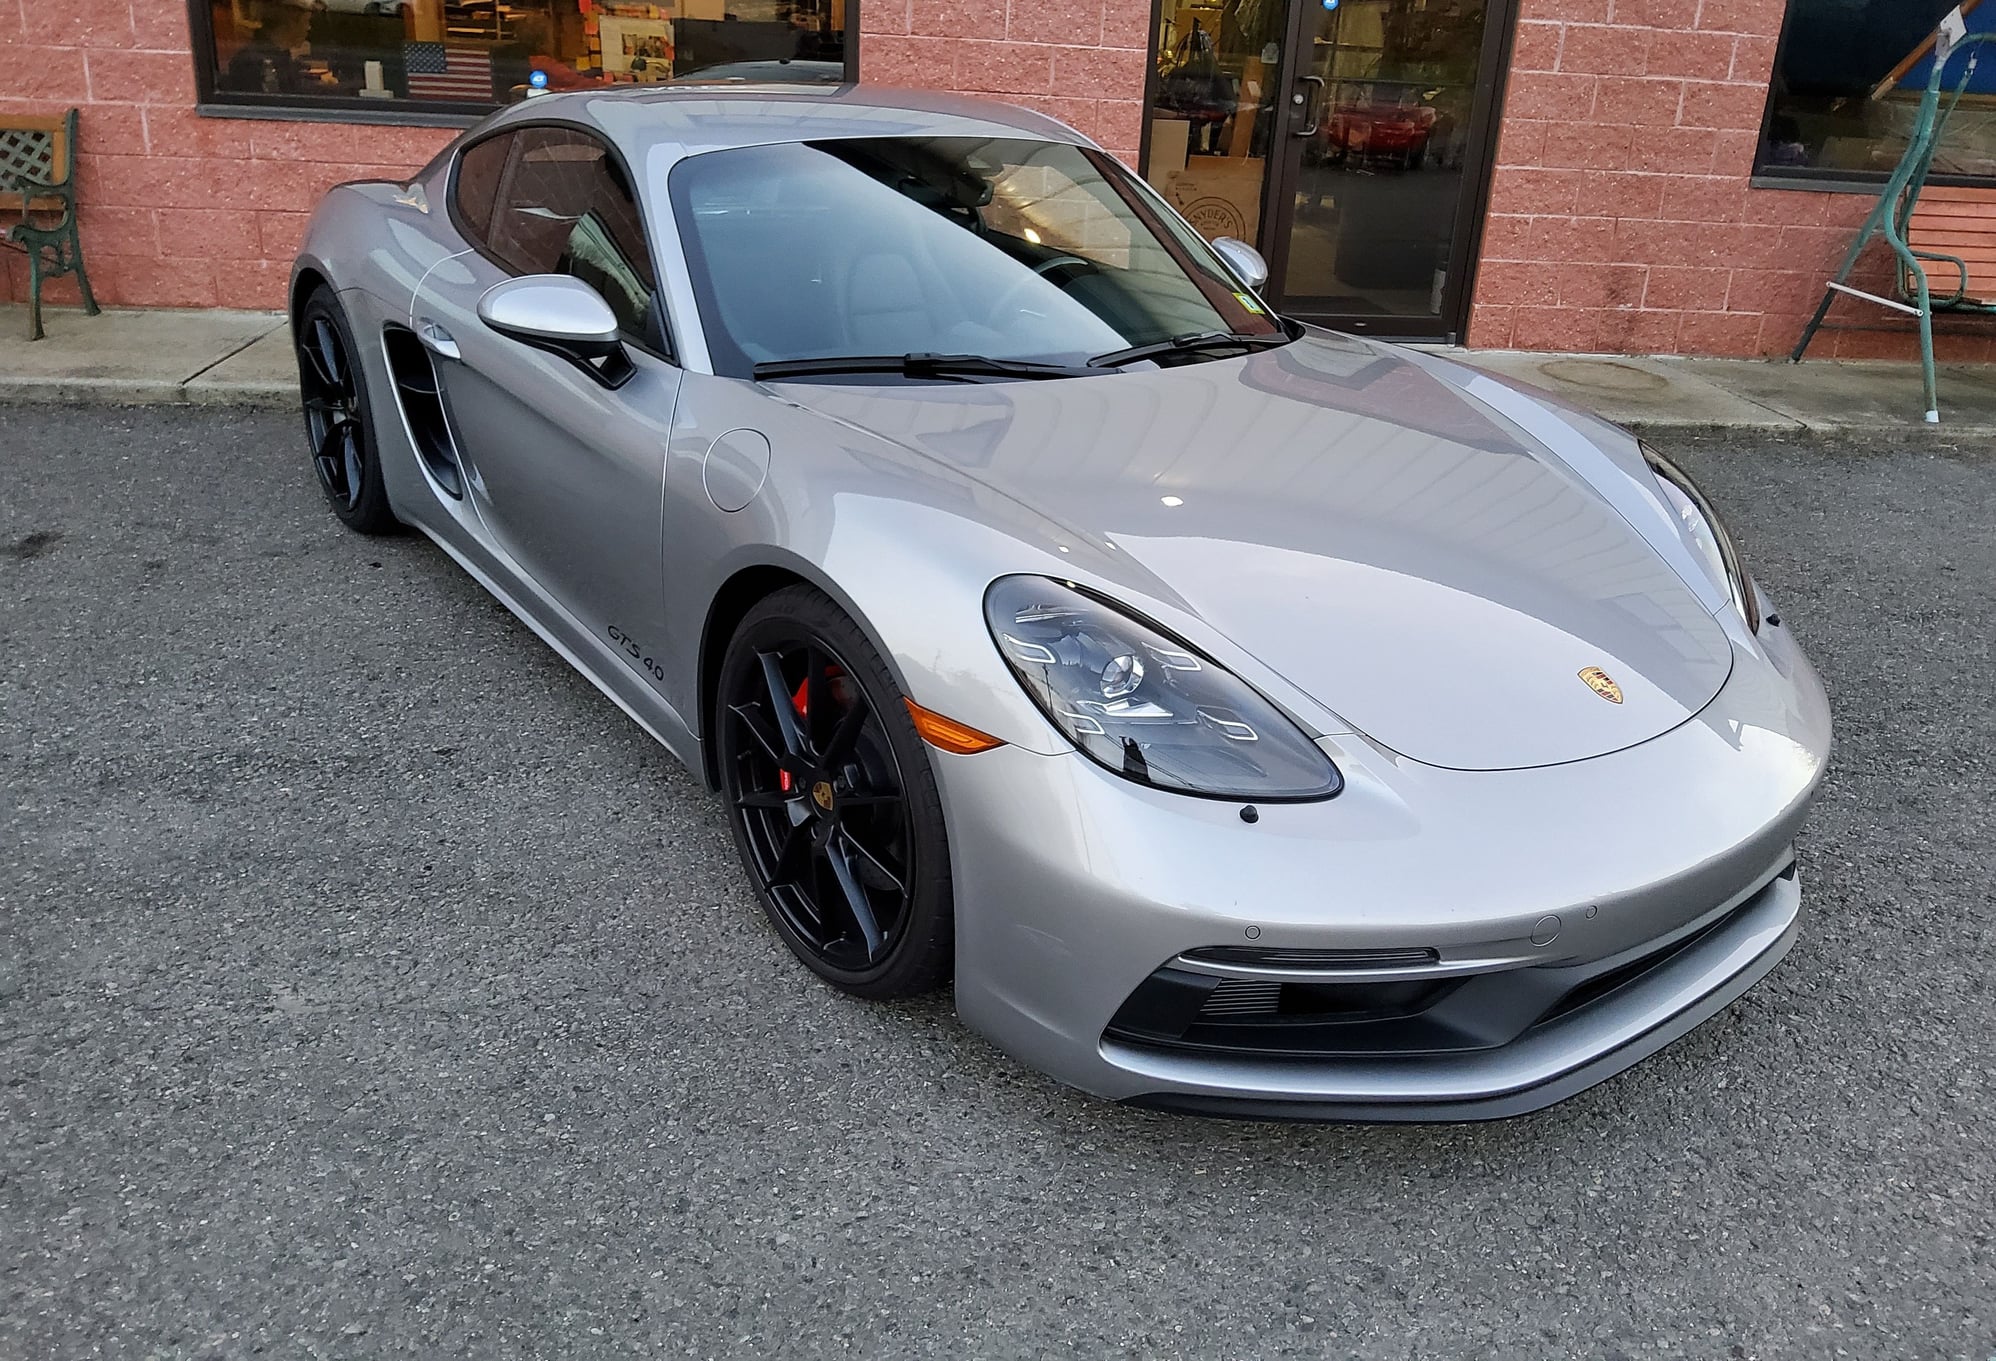 2020 Porsche 718 Cayman - 2020 Porsche Cayman GTS 4.0 - Used - VIN WP0802A81NS268155 - 865 Miles - 6 cyl - 2WD - Manual - Coupe - Silver - Derry, NH 03038, United States